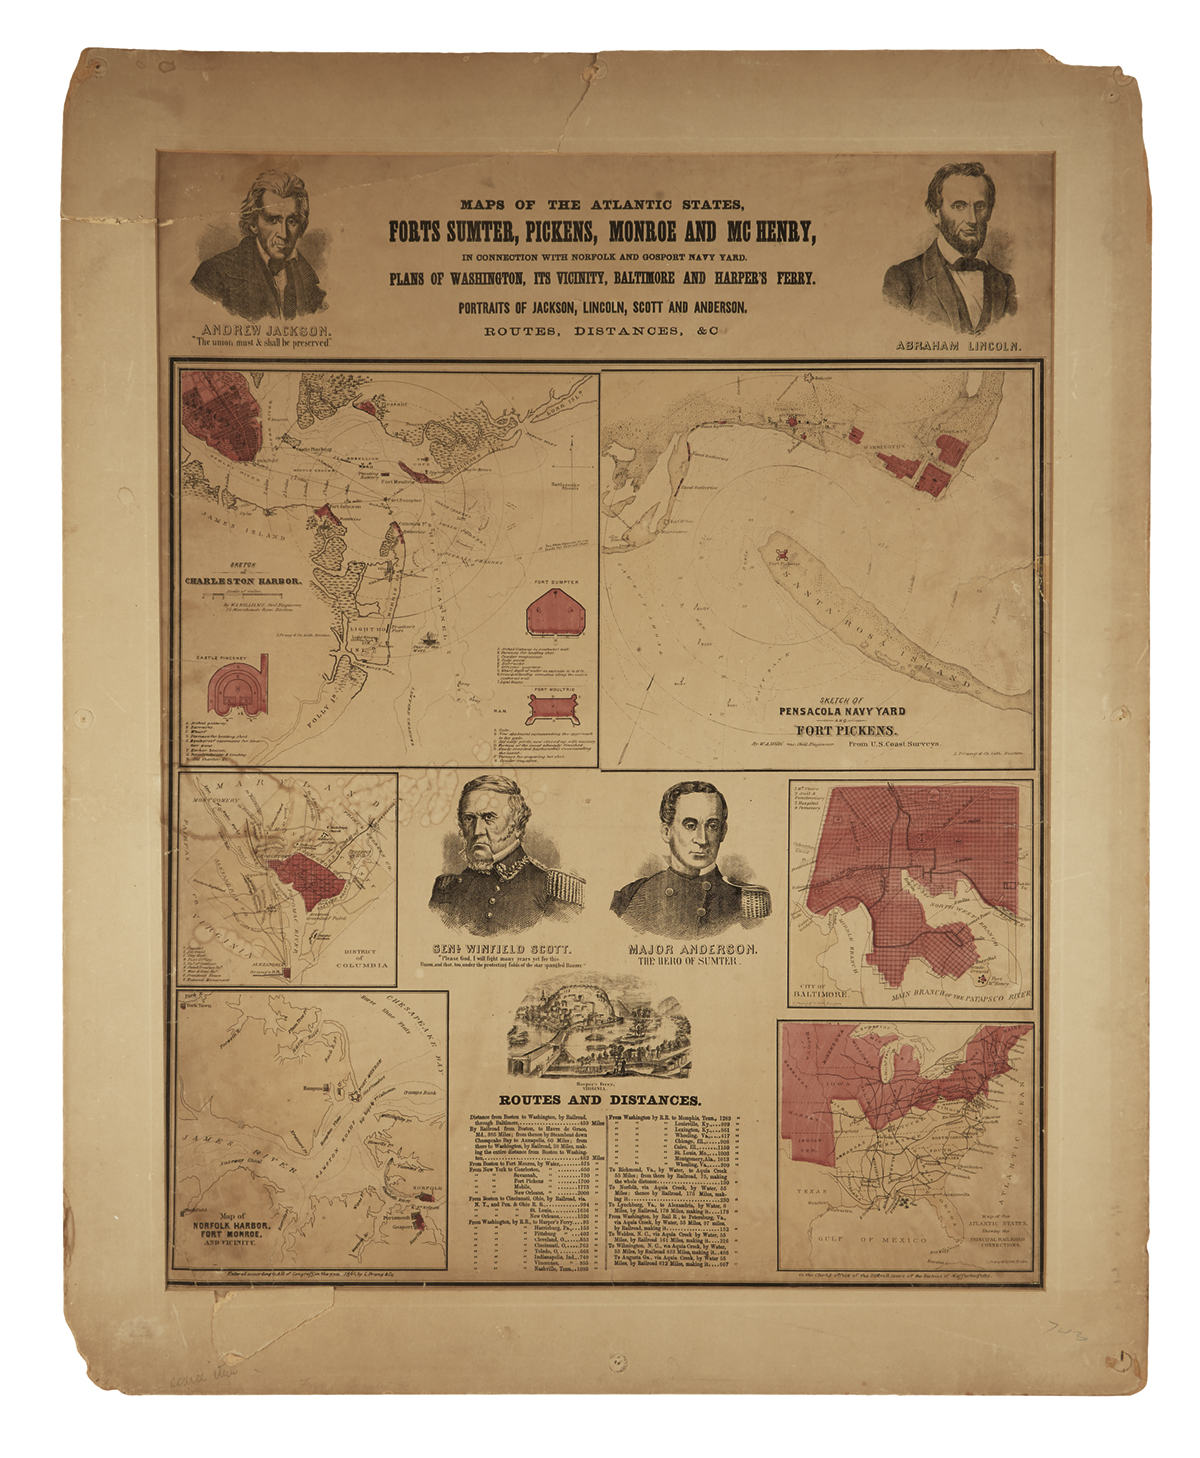 (CIVIL WAR.) Maps of the Atlantic States: Forts Sumter, Pickens, Monroe and McHenry.